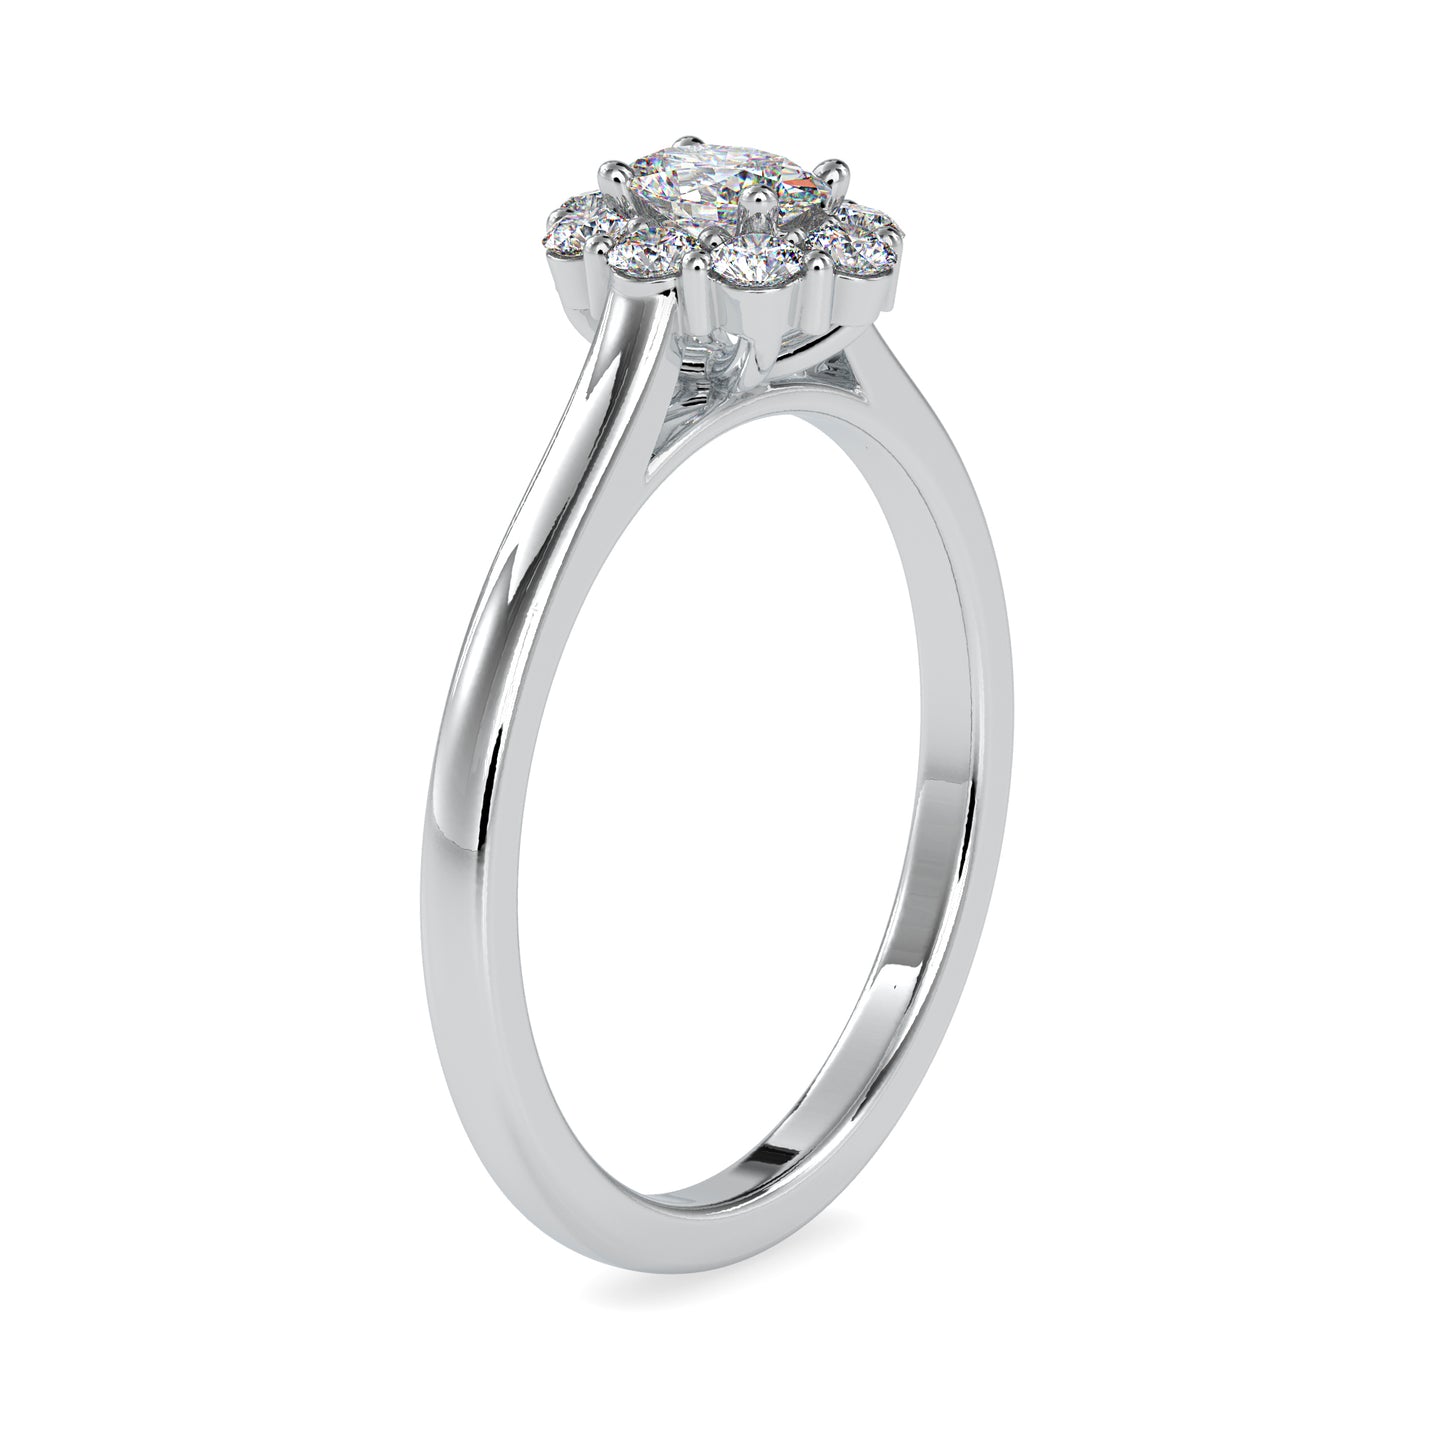 The Electra Ring -Moissanite diamond Cluster Ring